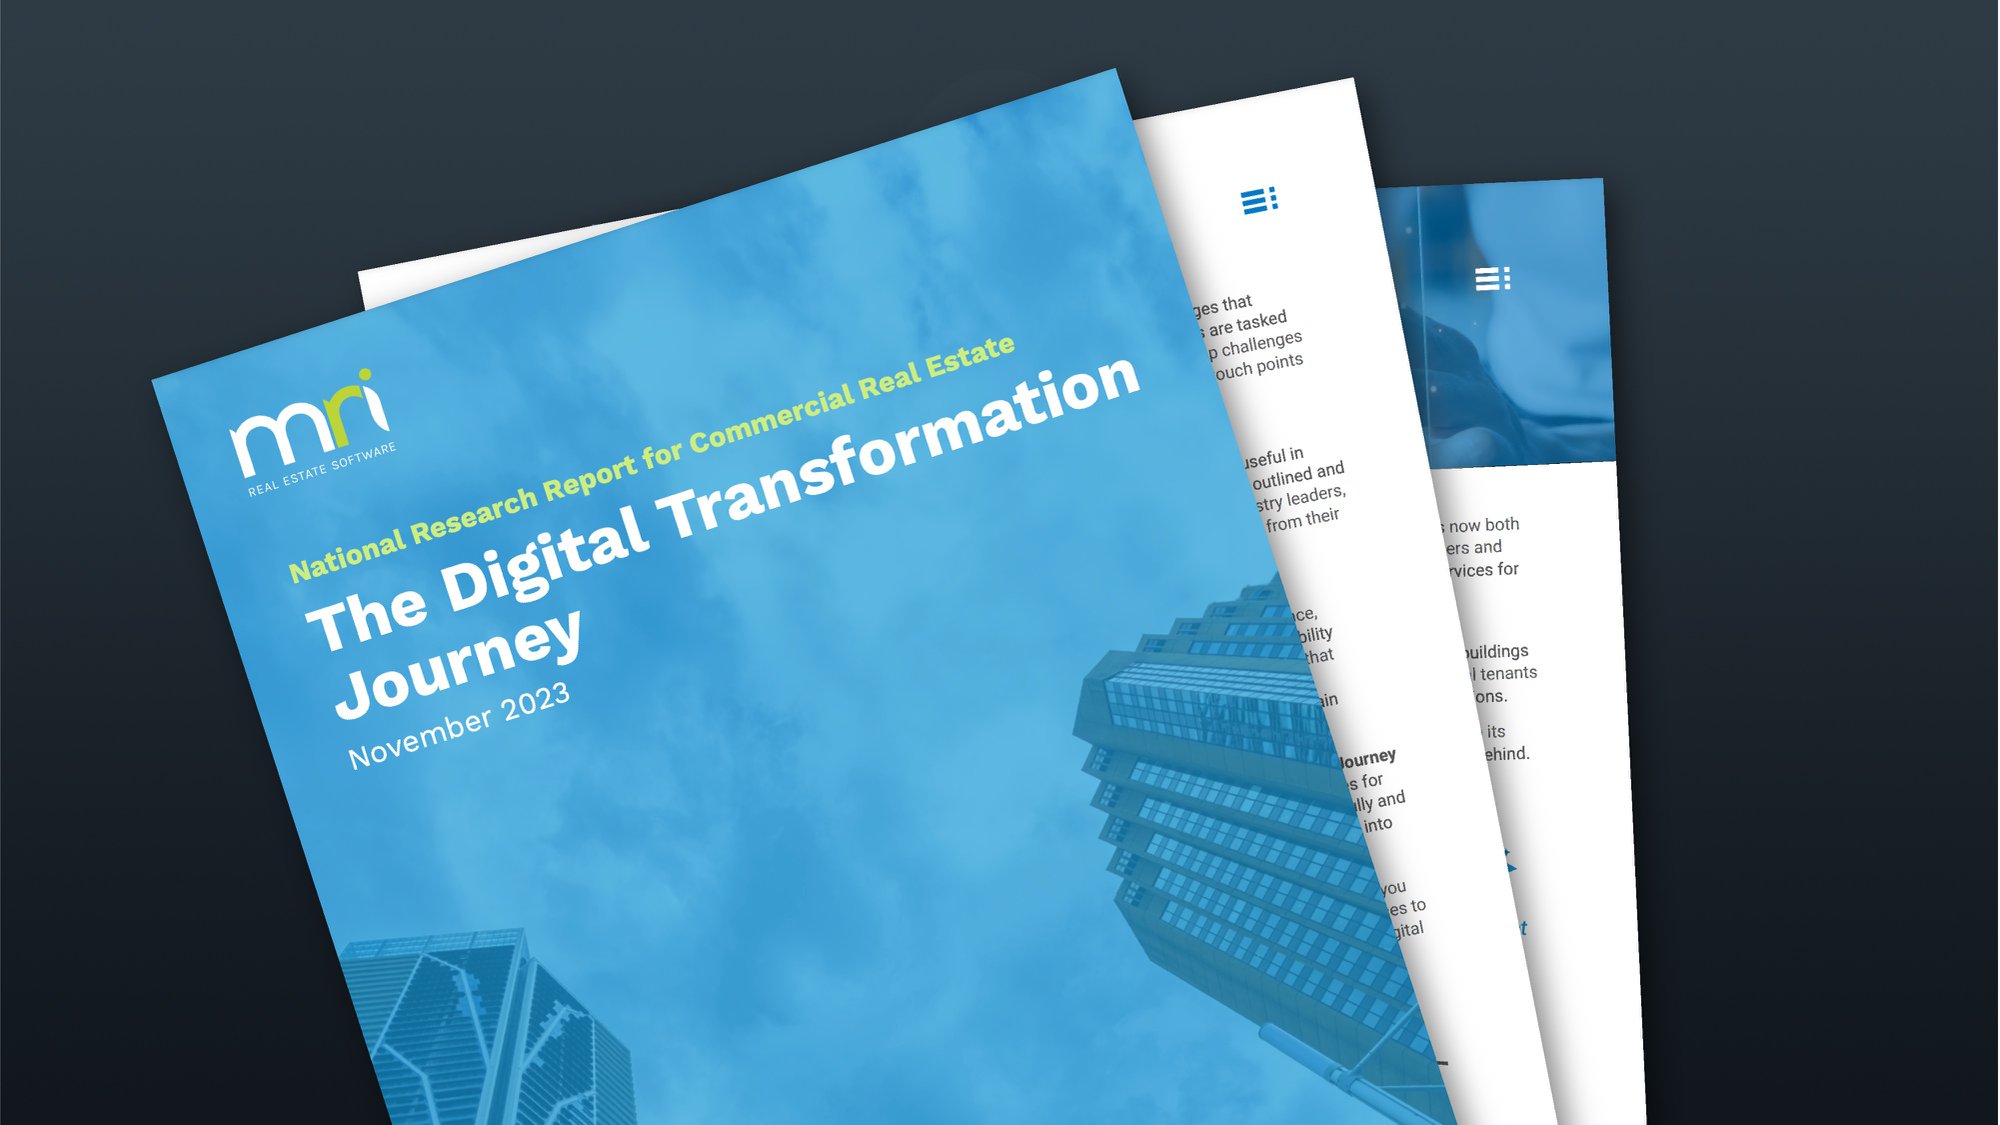 The Digital Transformation Journey: How to Boost People, Processes and Performance